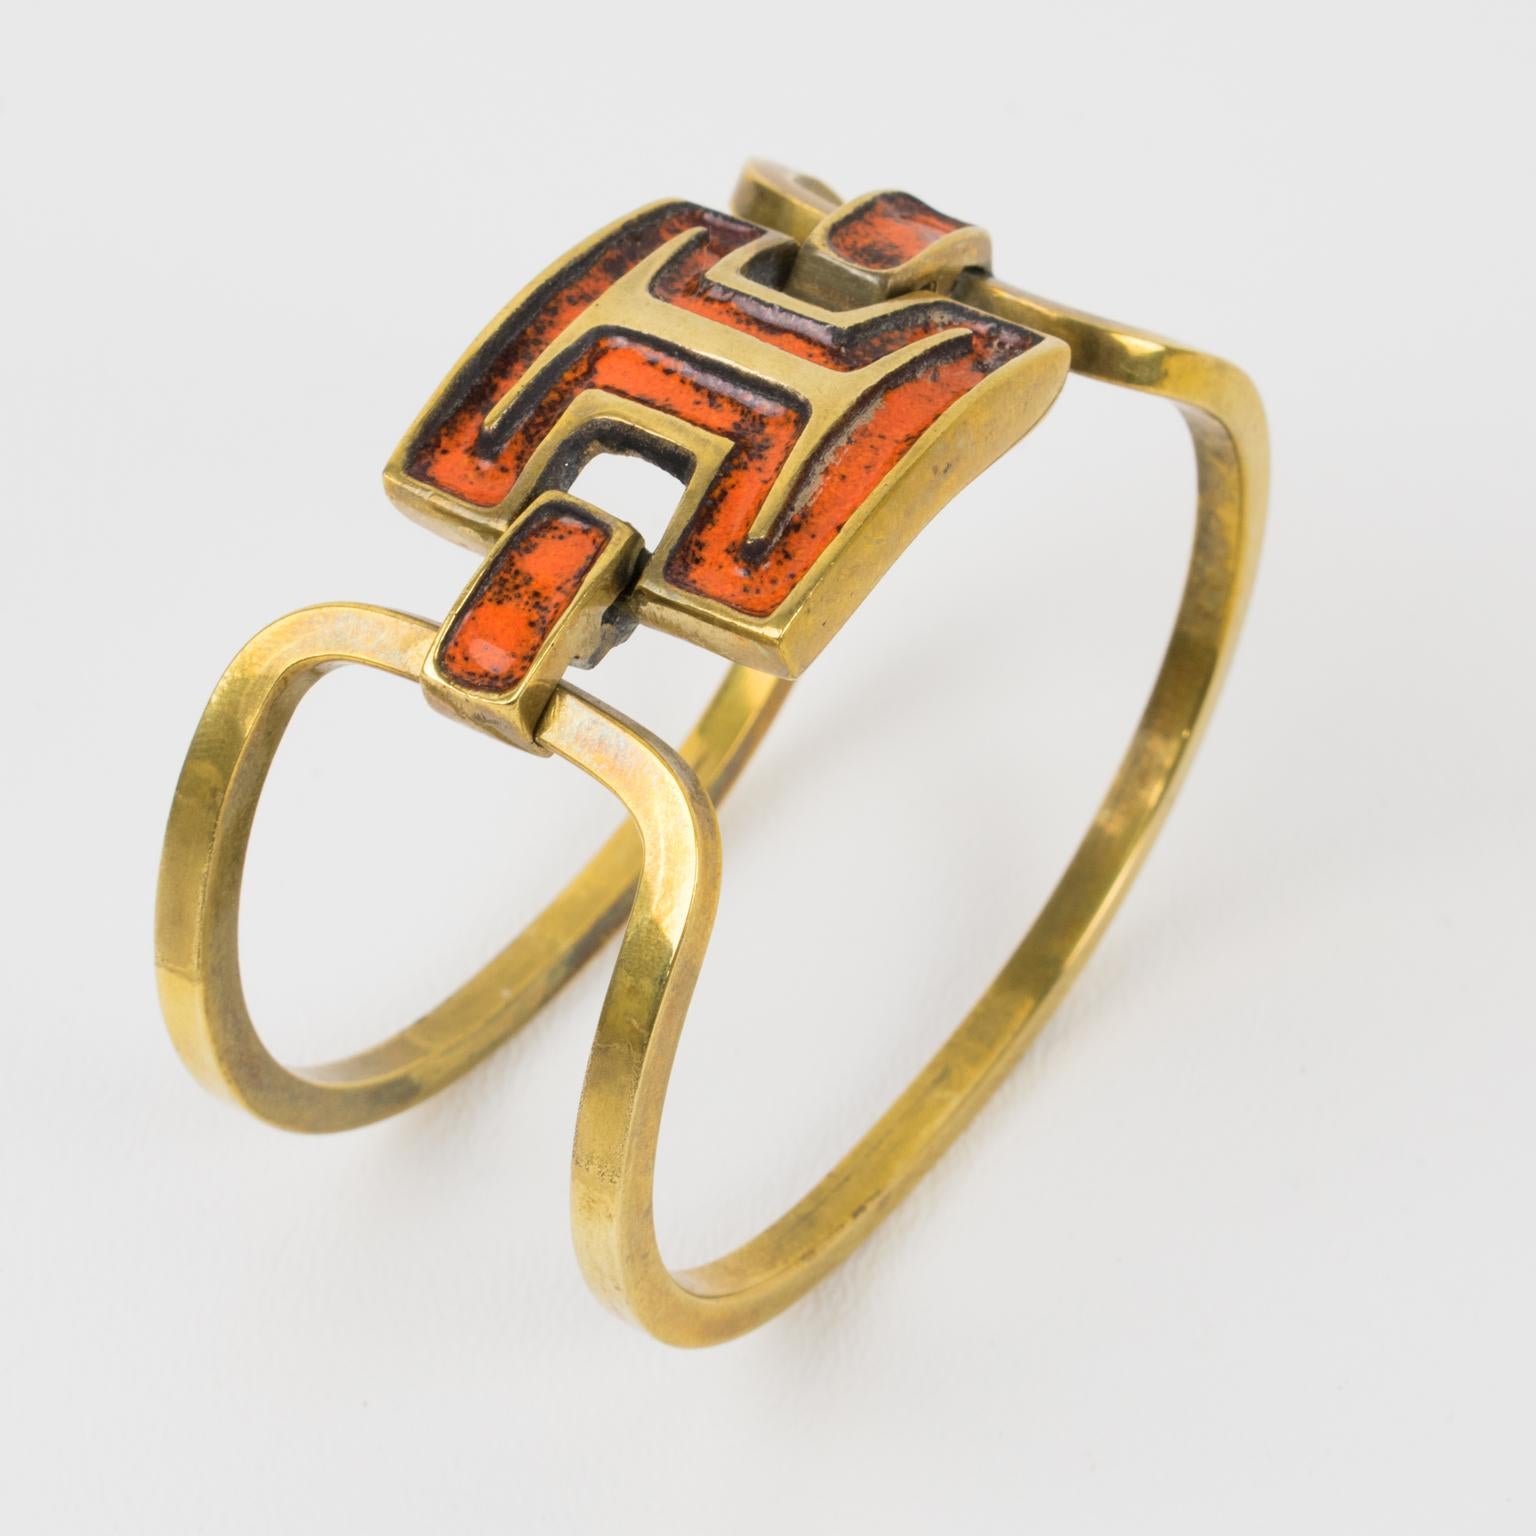 French designer St Luc designed this lovely modernist bronze and enamel clamper bracelet in the 1960s. The piece boasts a gilded bronze two-band design with geometric gilded bronze metal carved elements topped with orange and black enamel. The